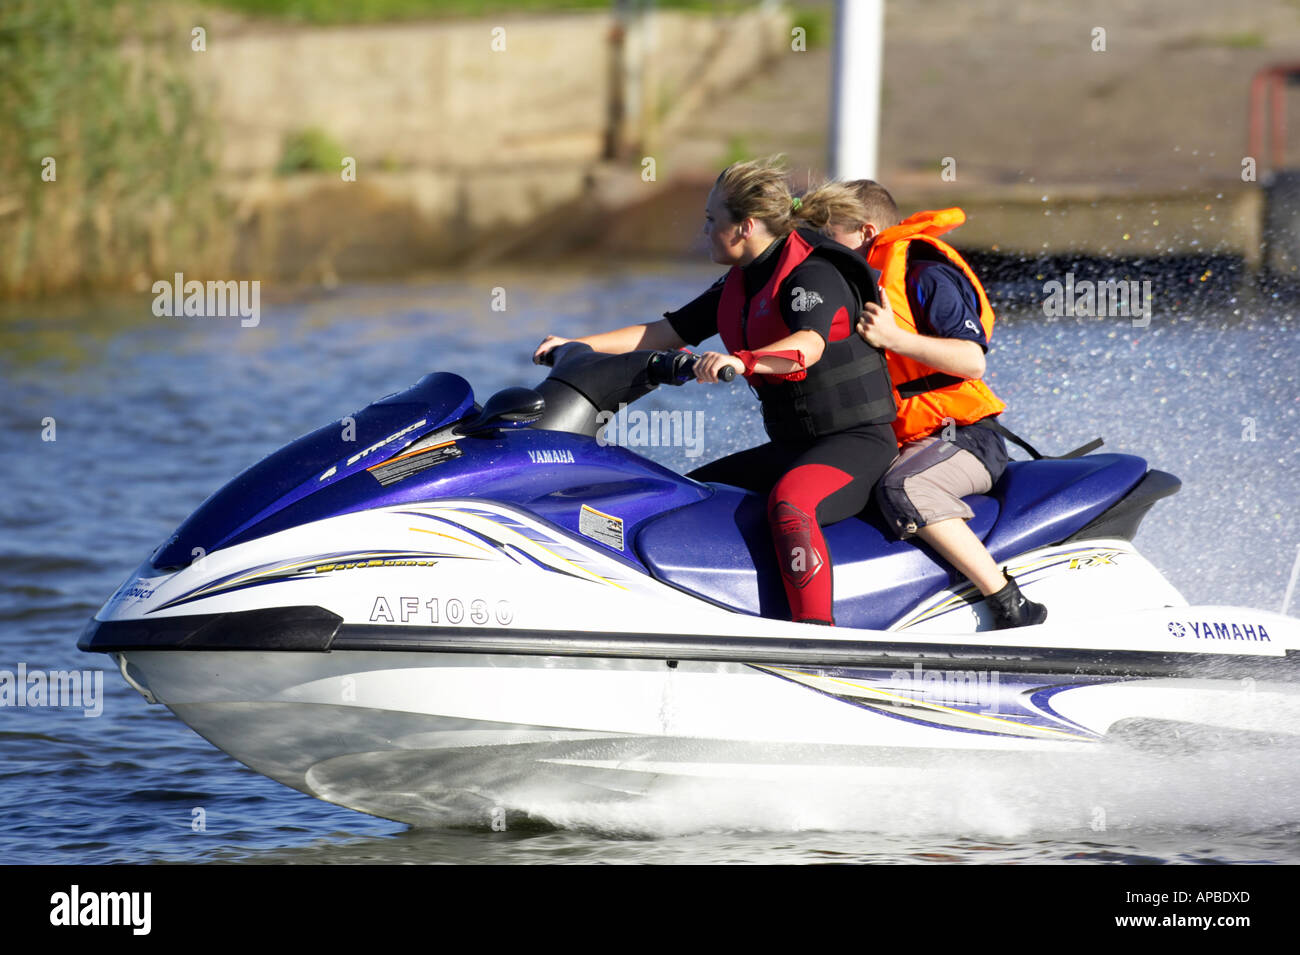 young woman in wetsuit driving a yamaha 4 stroke AF1030 waverider with  young boy passenger at speed Stock Photo - Alamy